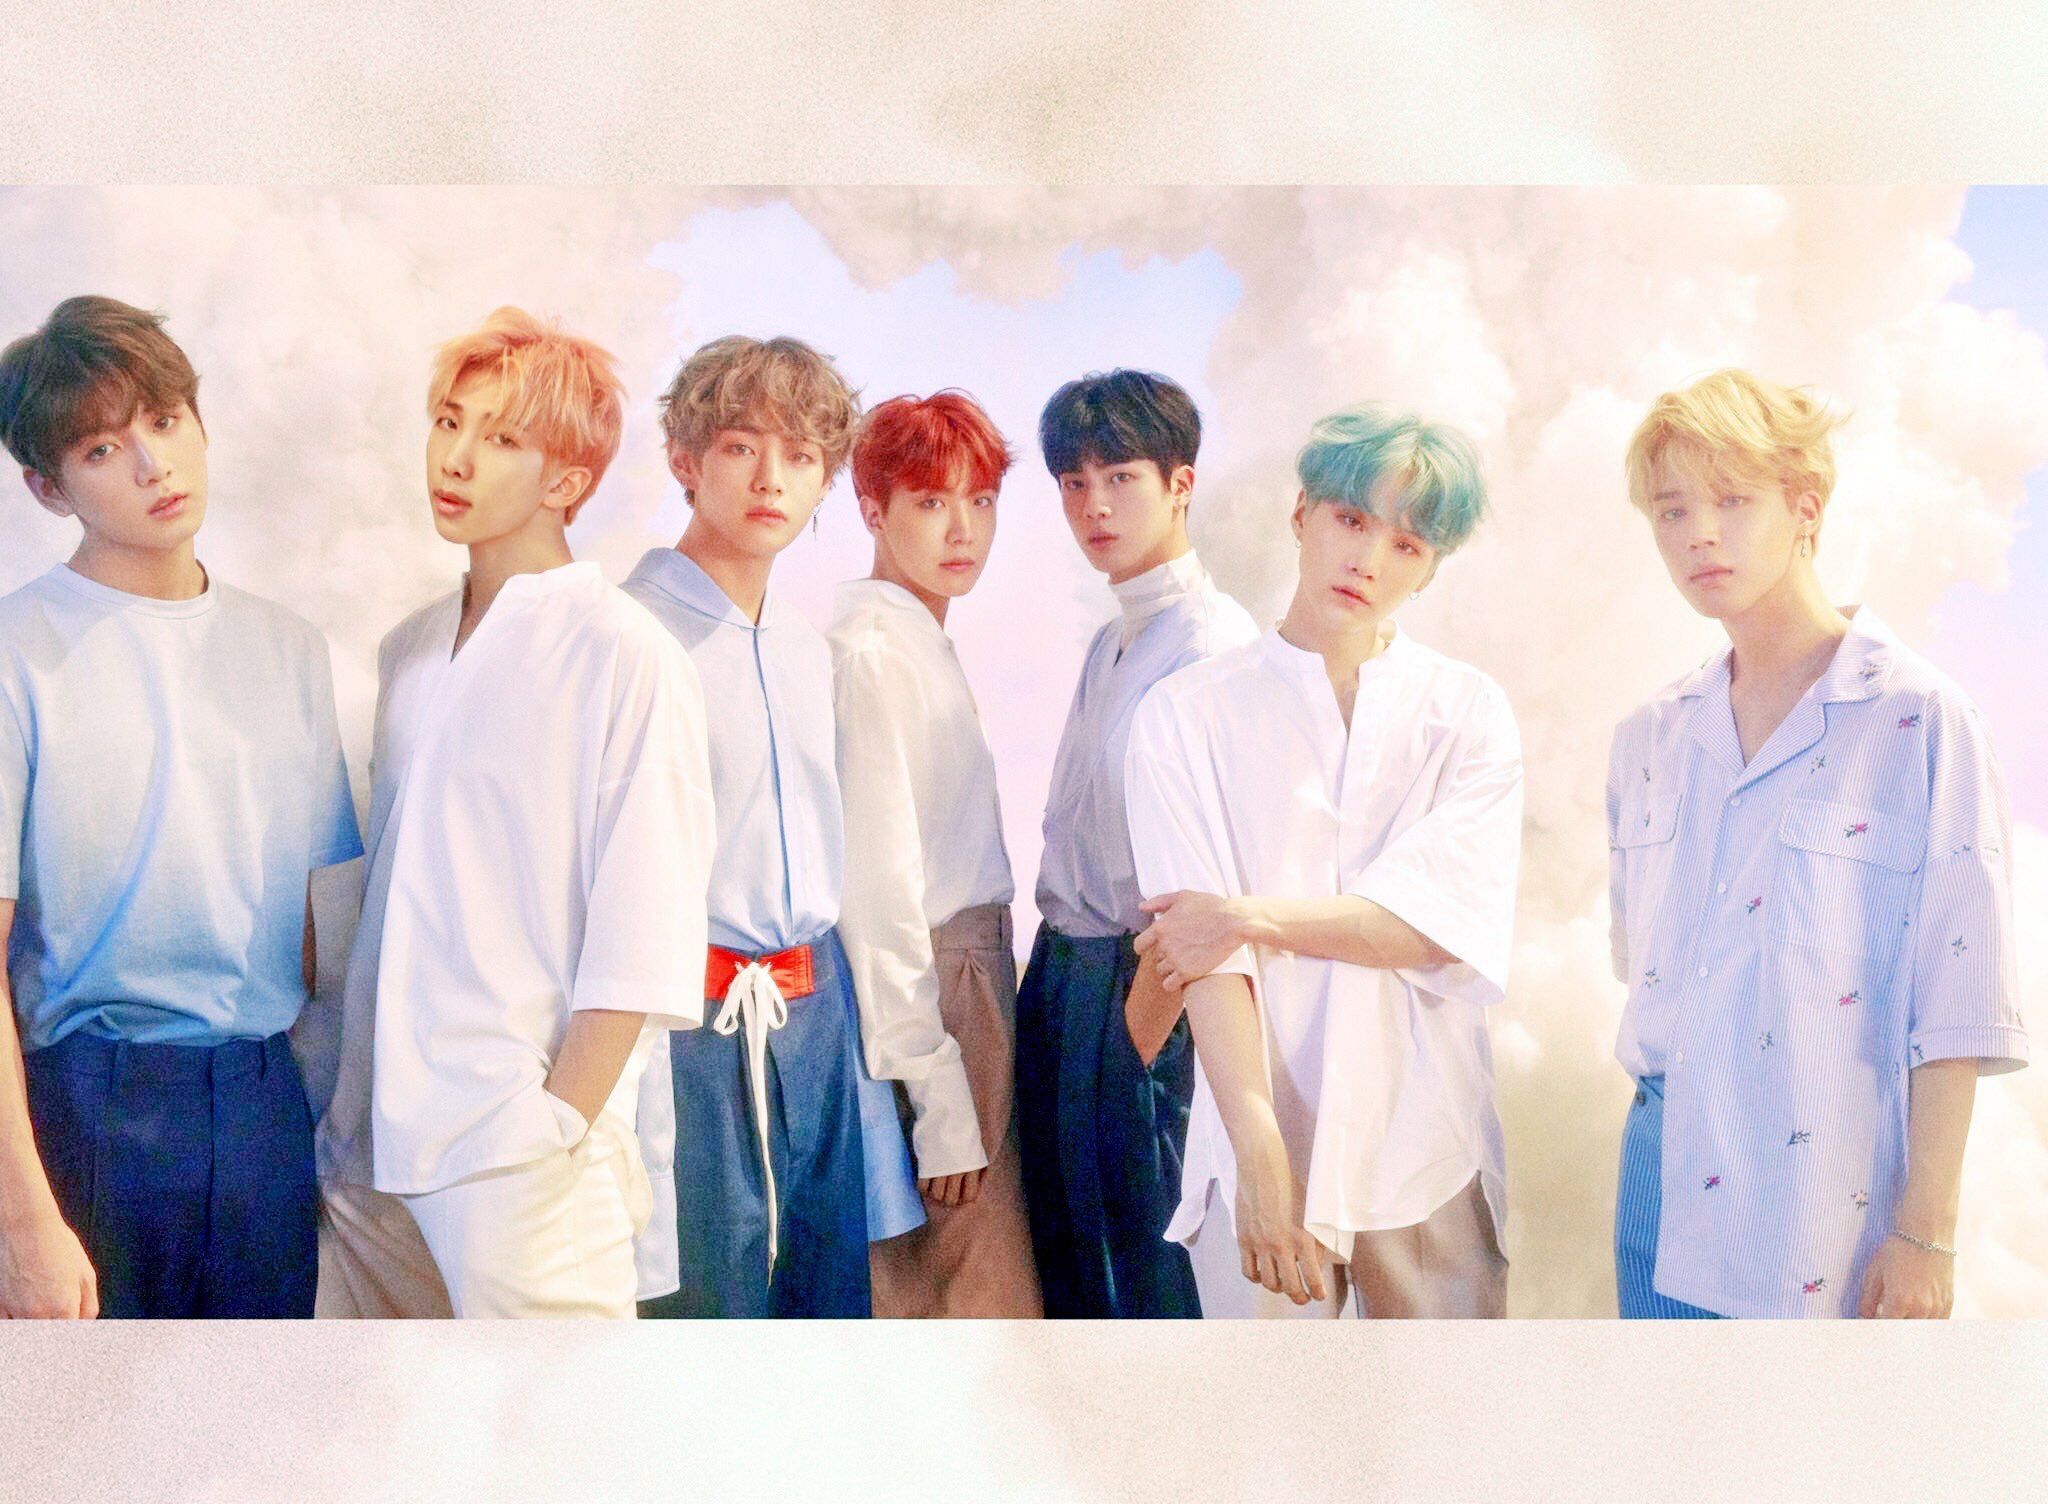 Love Yourself BTS Photoshoot 2018 Wallpapers on WallpaperDog